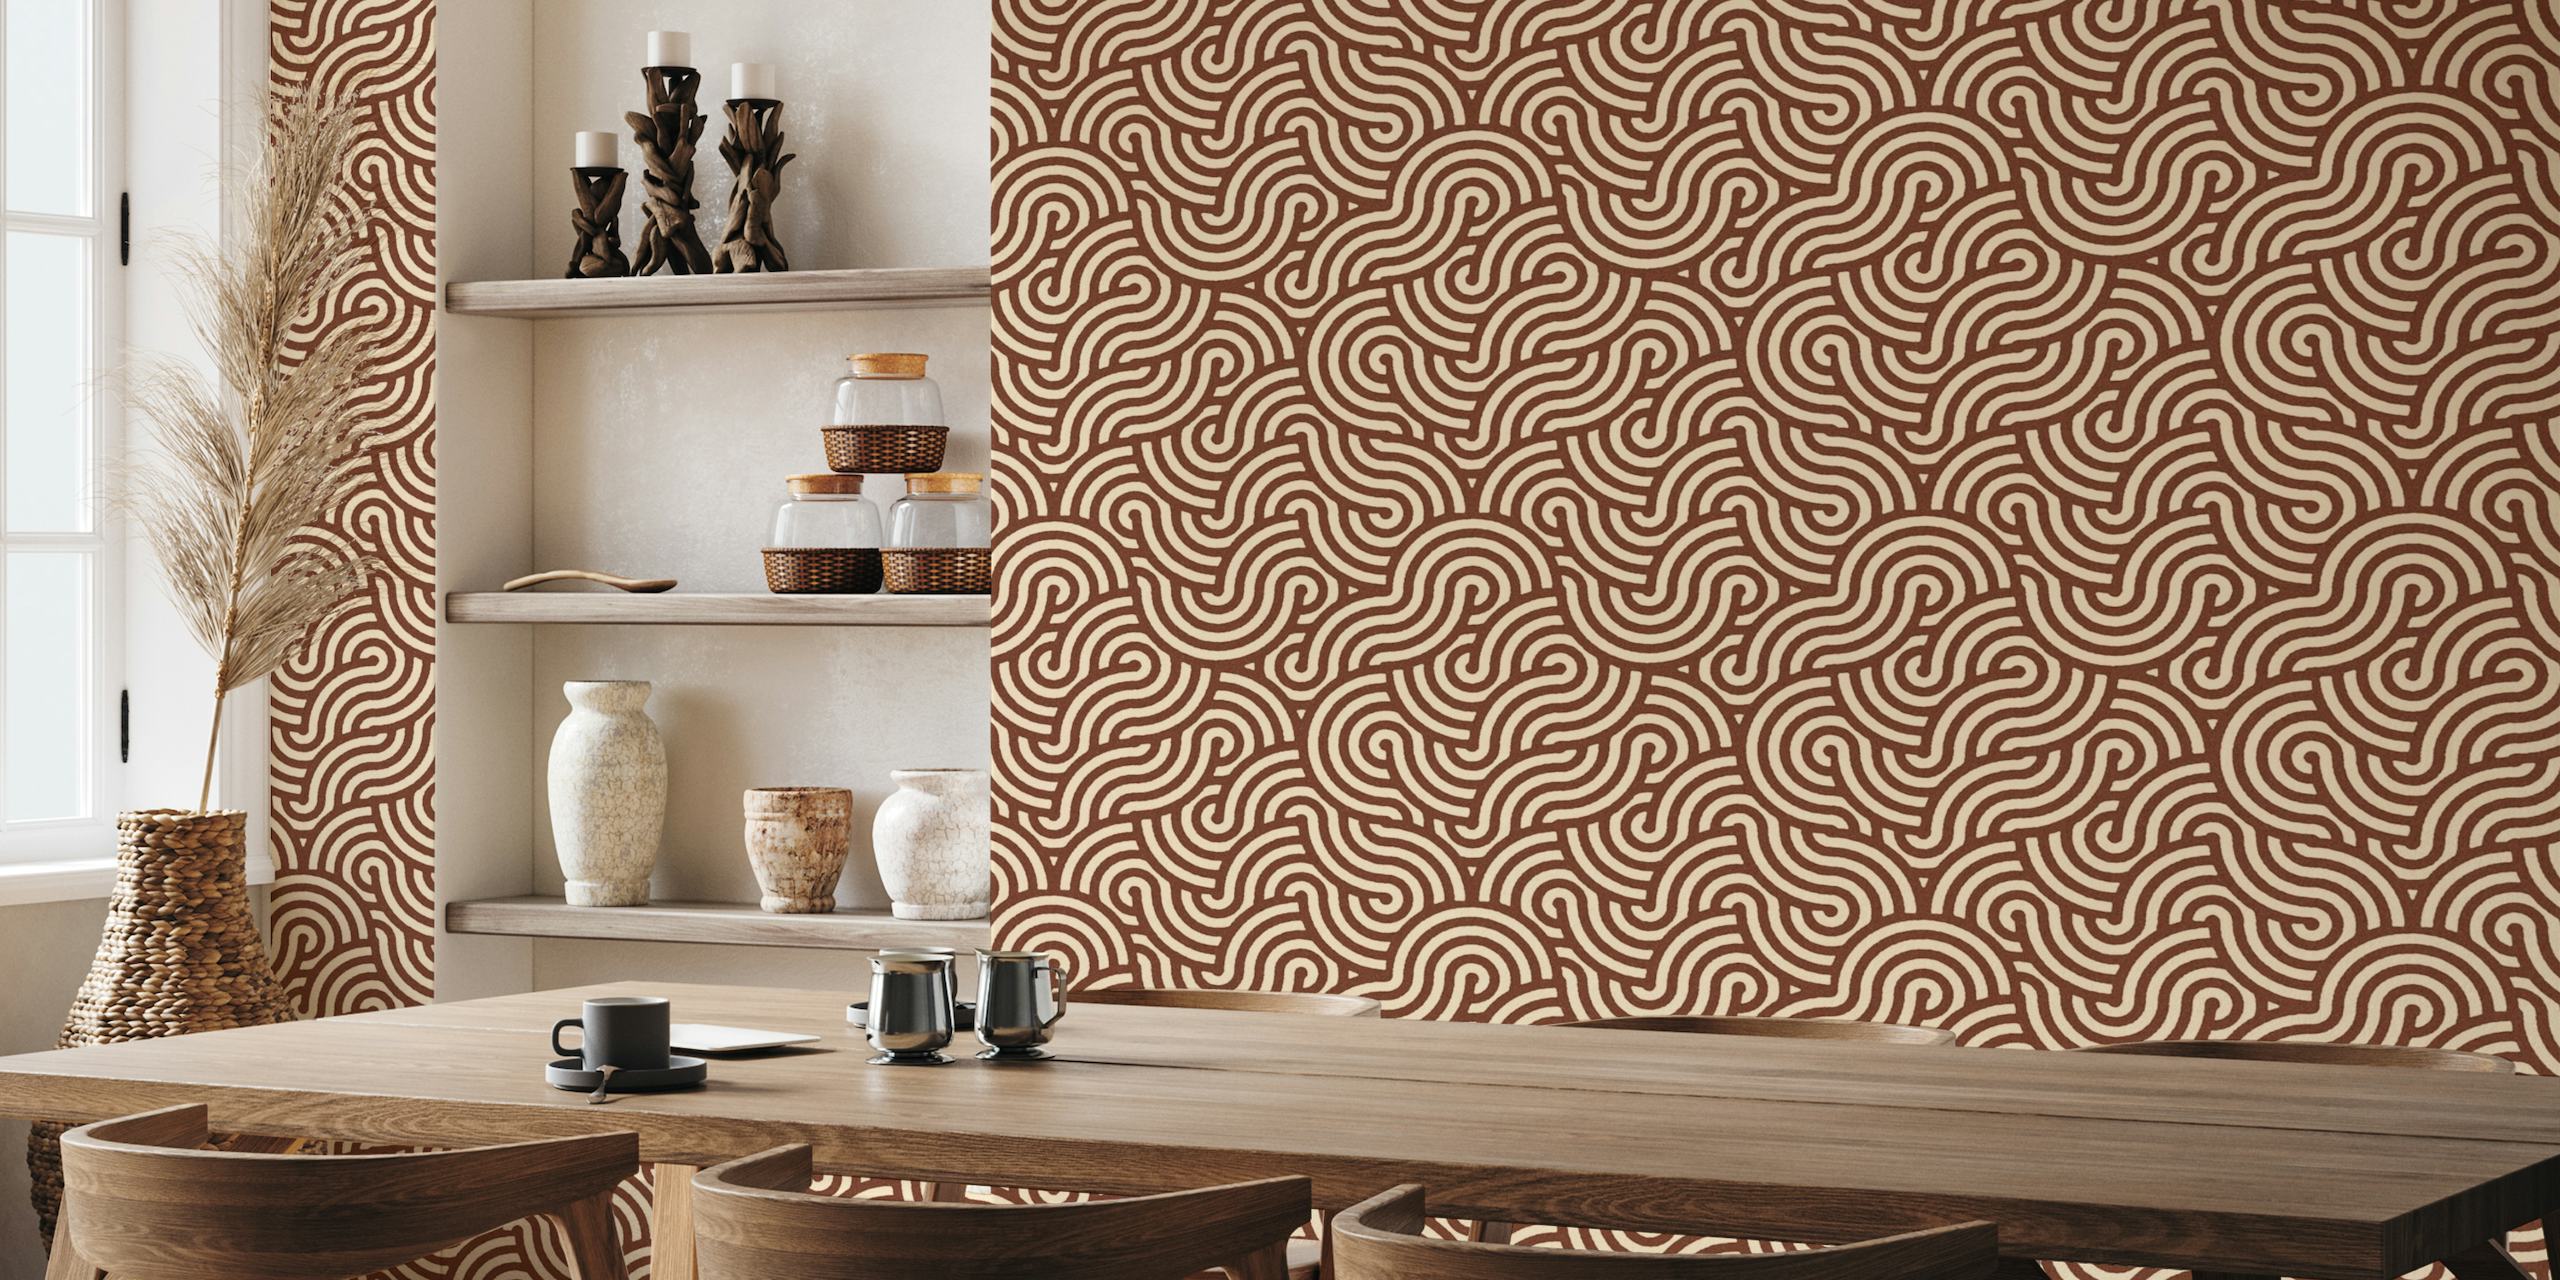 SWIRL Cacao and Almond wall mural with abstract swirling pattern in earthy tones